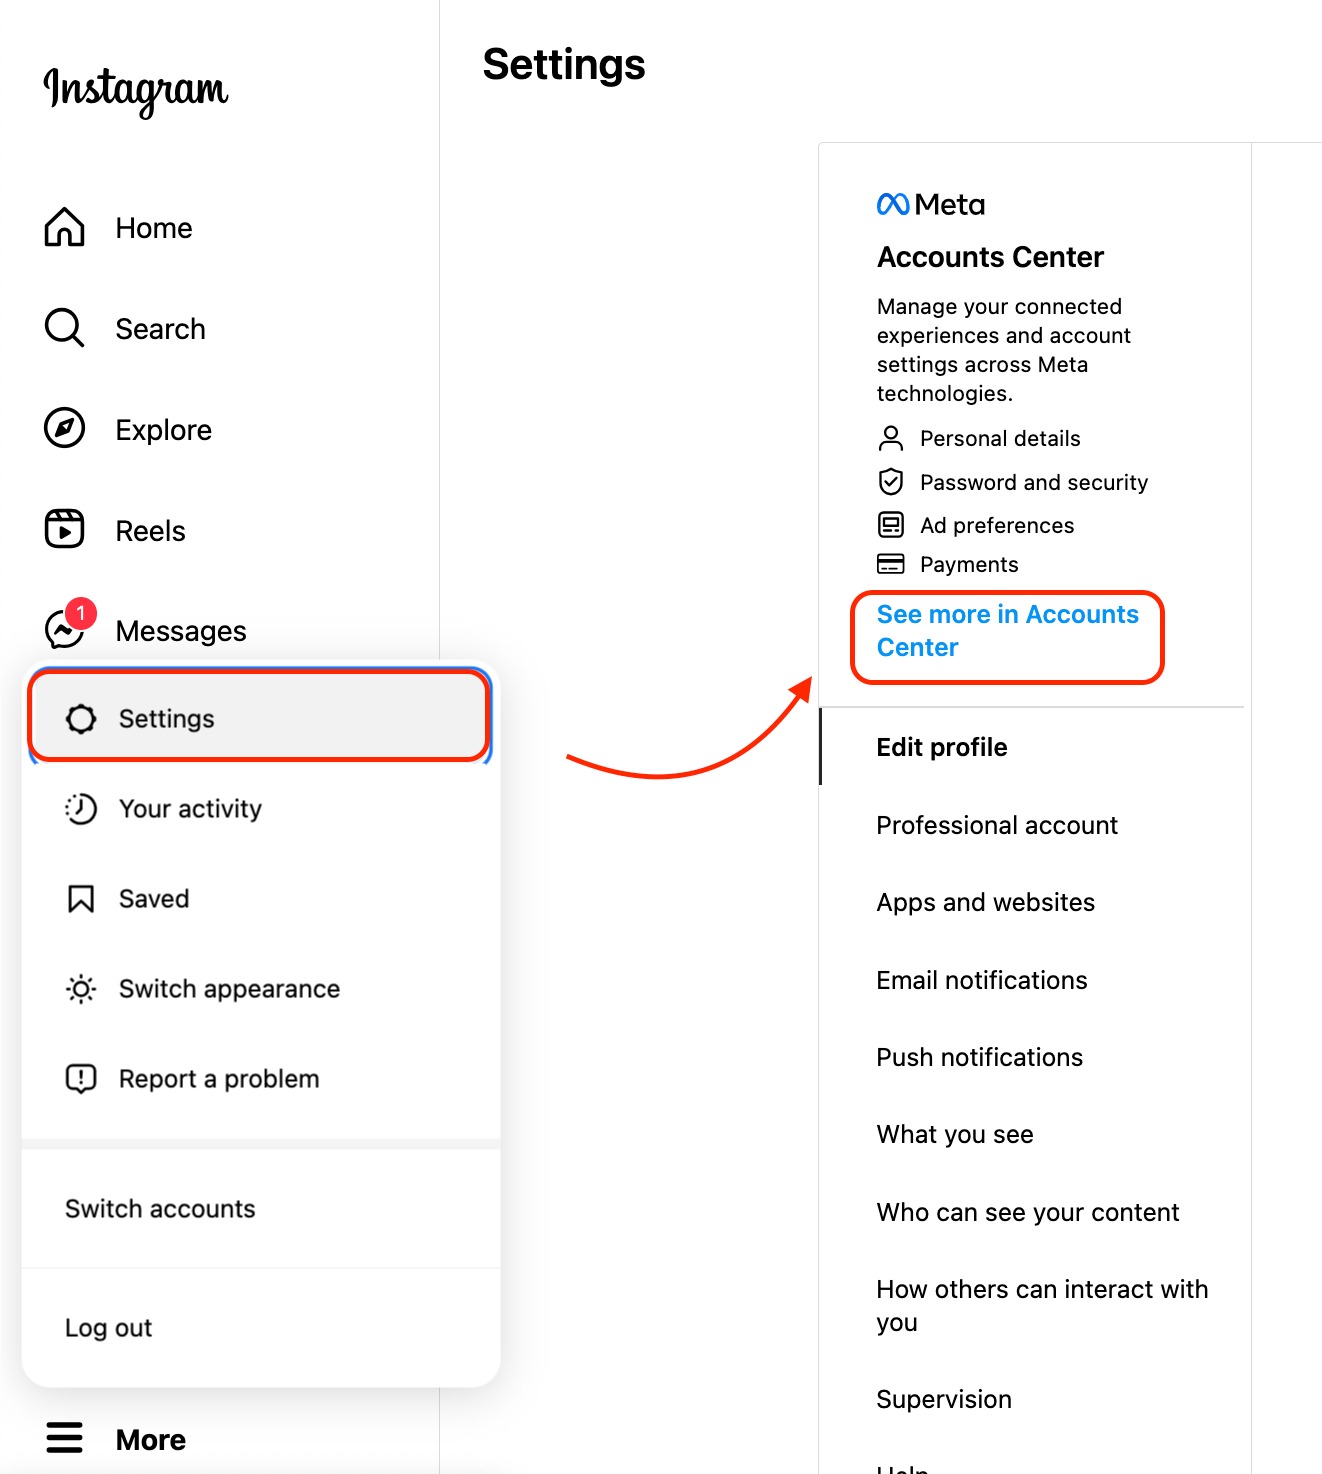 Instagram Settings with the "See more in Accounts Center" button highlighted. 